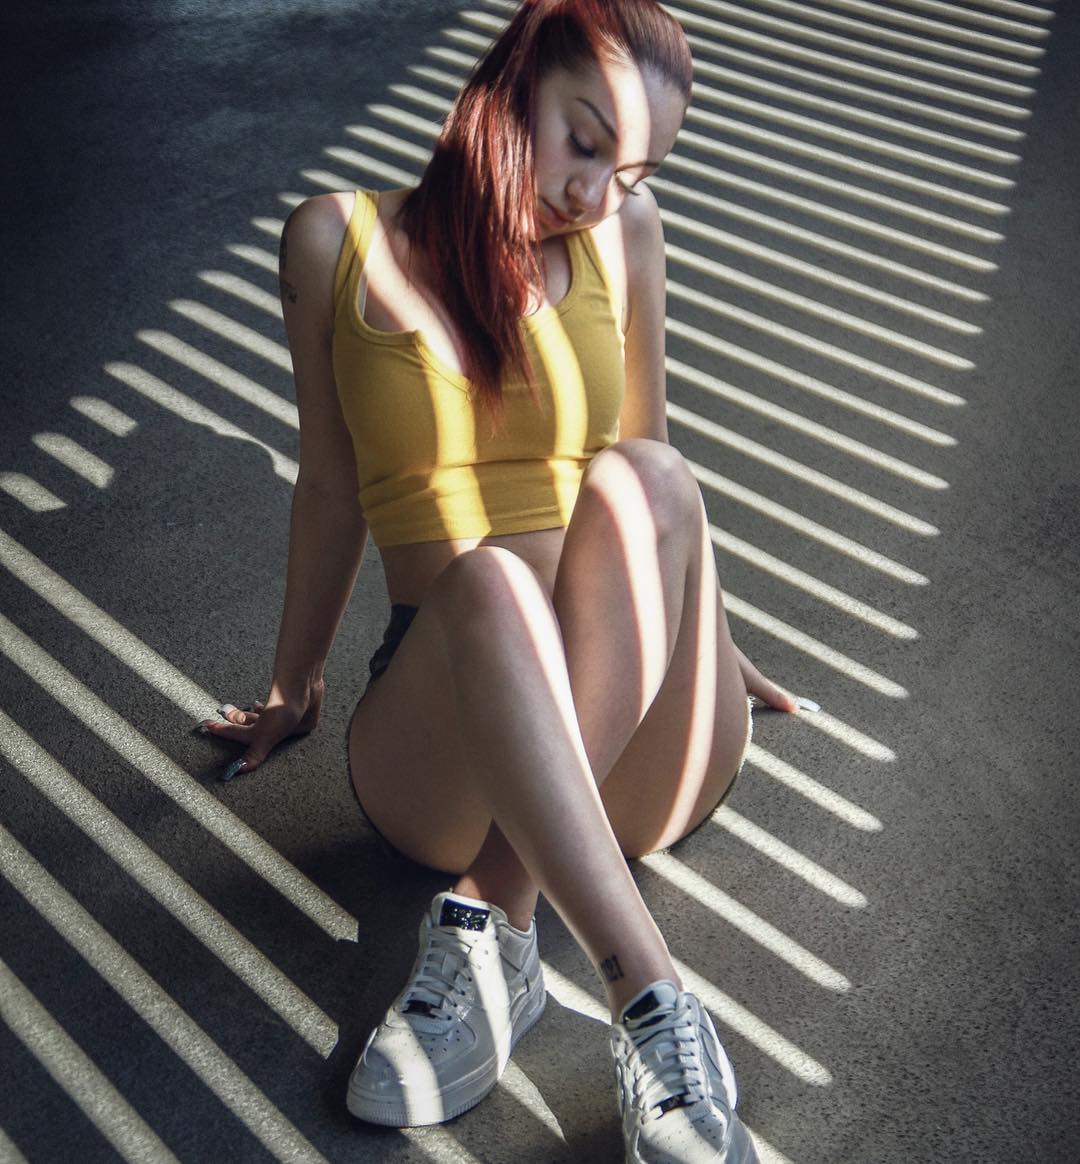 70+ Hot Pictures Of Danielle Bregoli aka Bhad Bhabie Which W